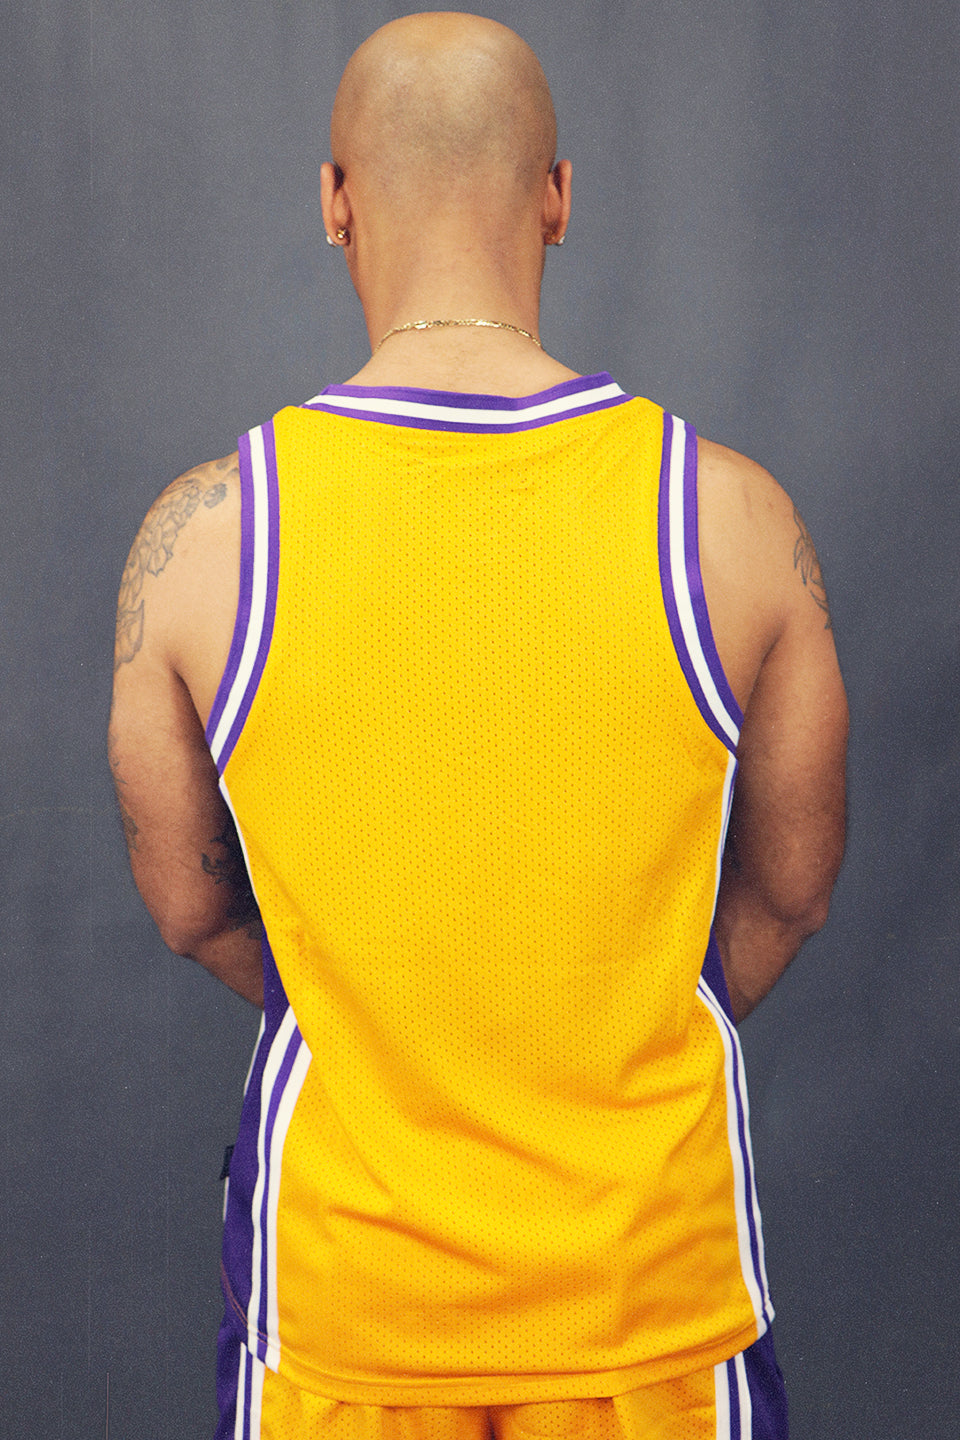 Back of the Men's Sleeveless Basketball Shirt Muscle Workout Gold Los Angeles Mesh Tank Top